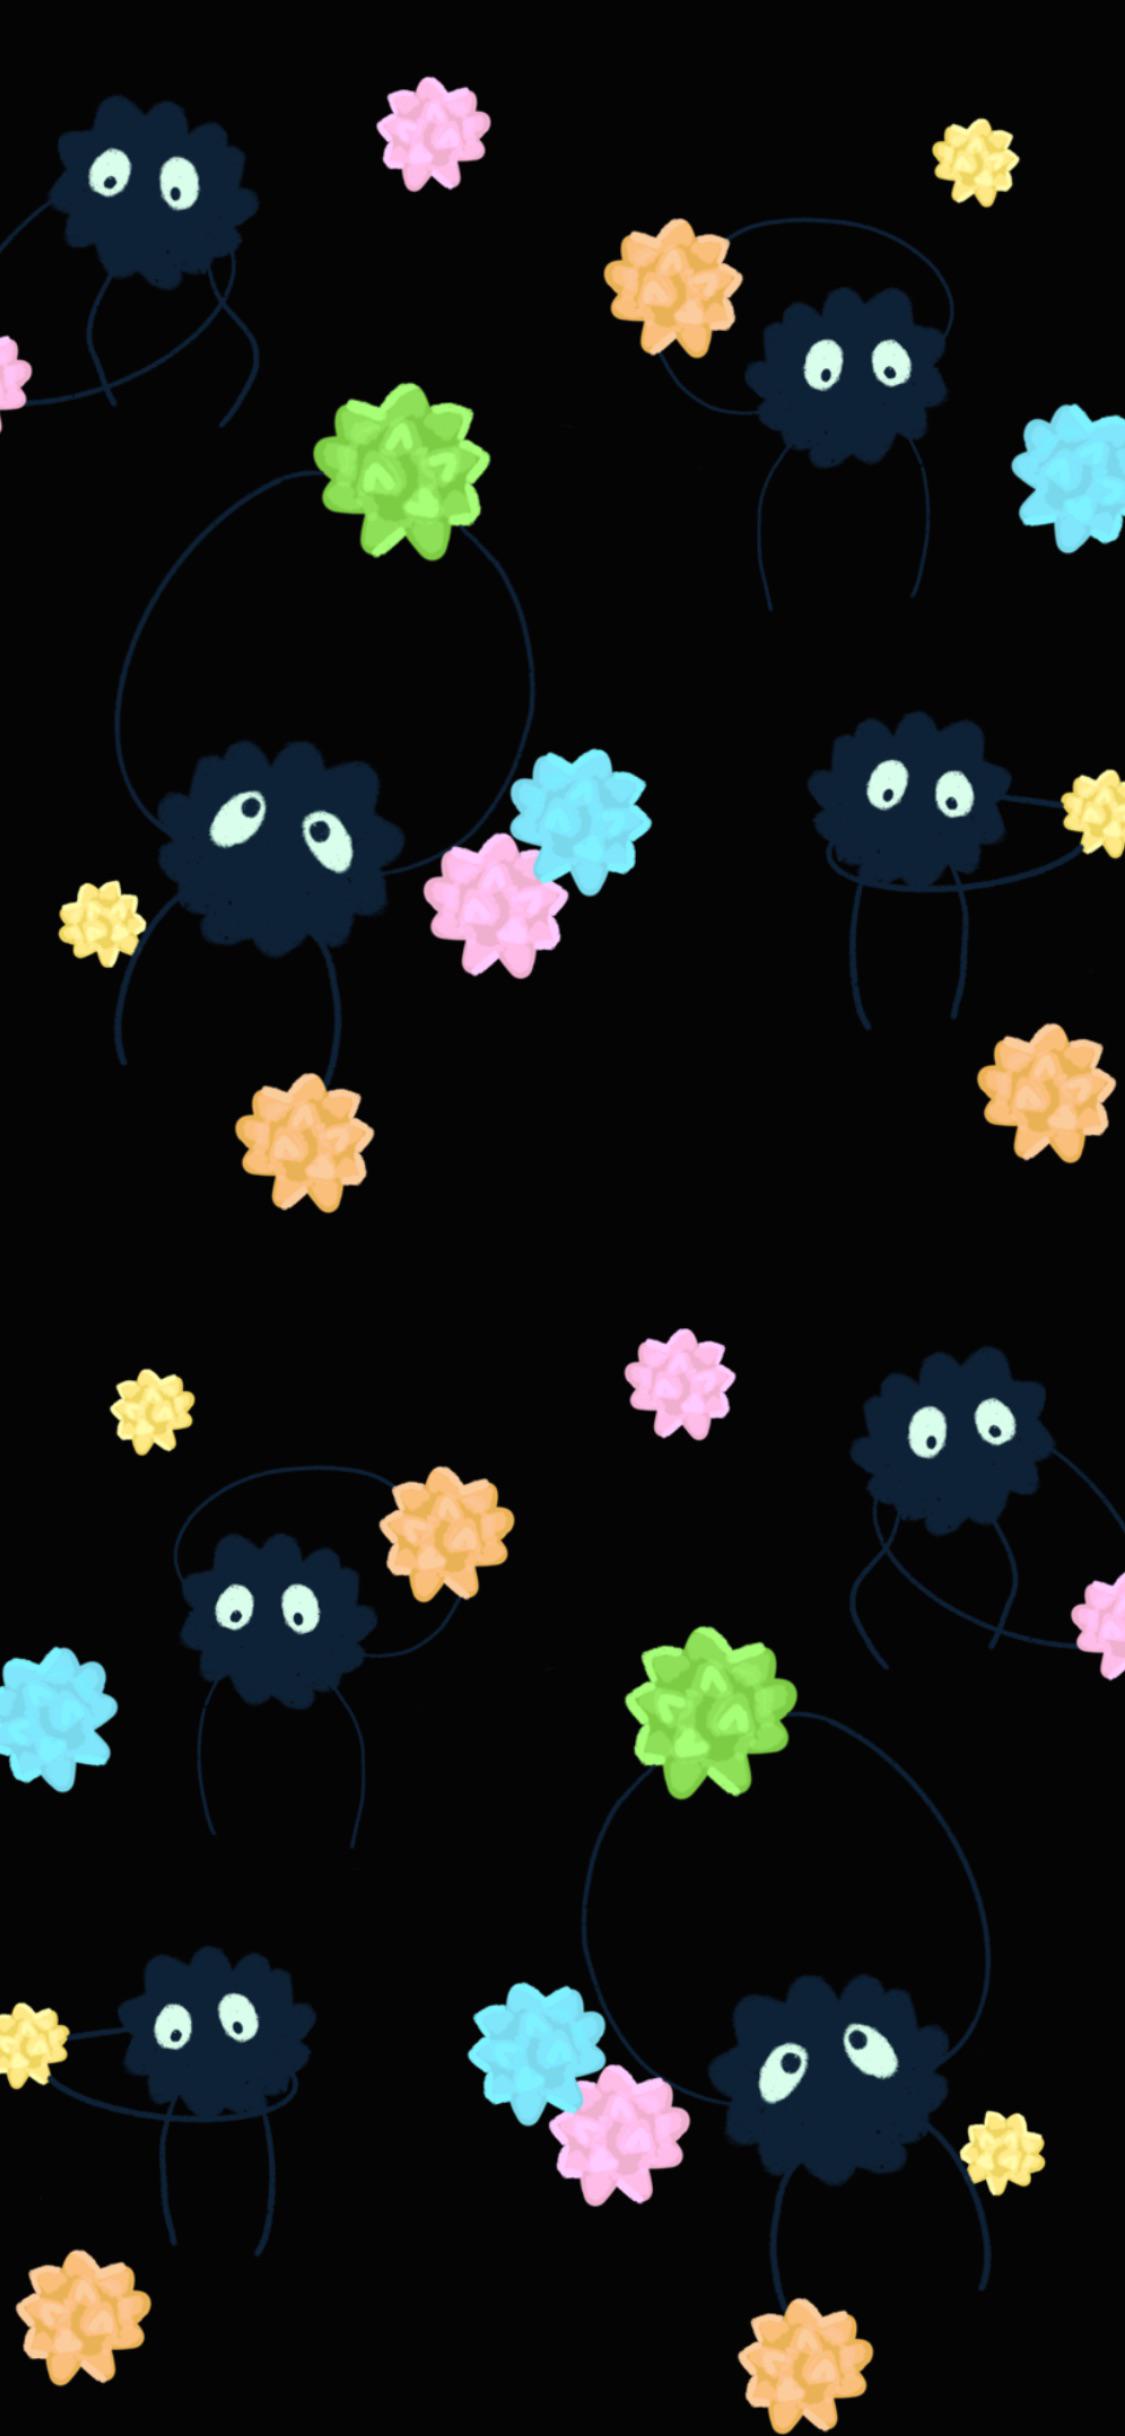 I made a free soot sprite wallpaper if anyone wants :) I added a link for high res free download